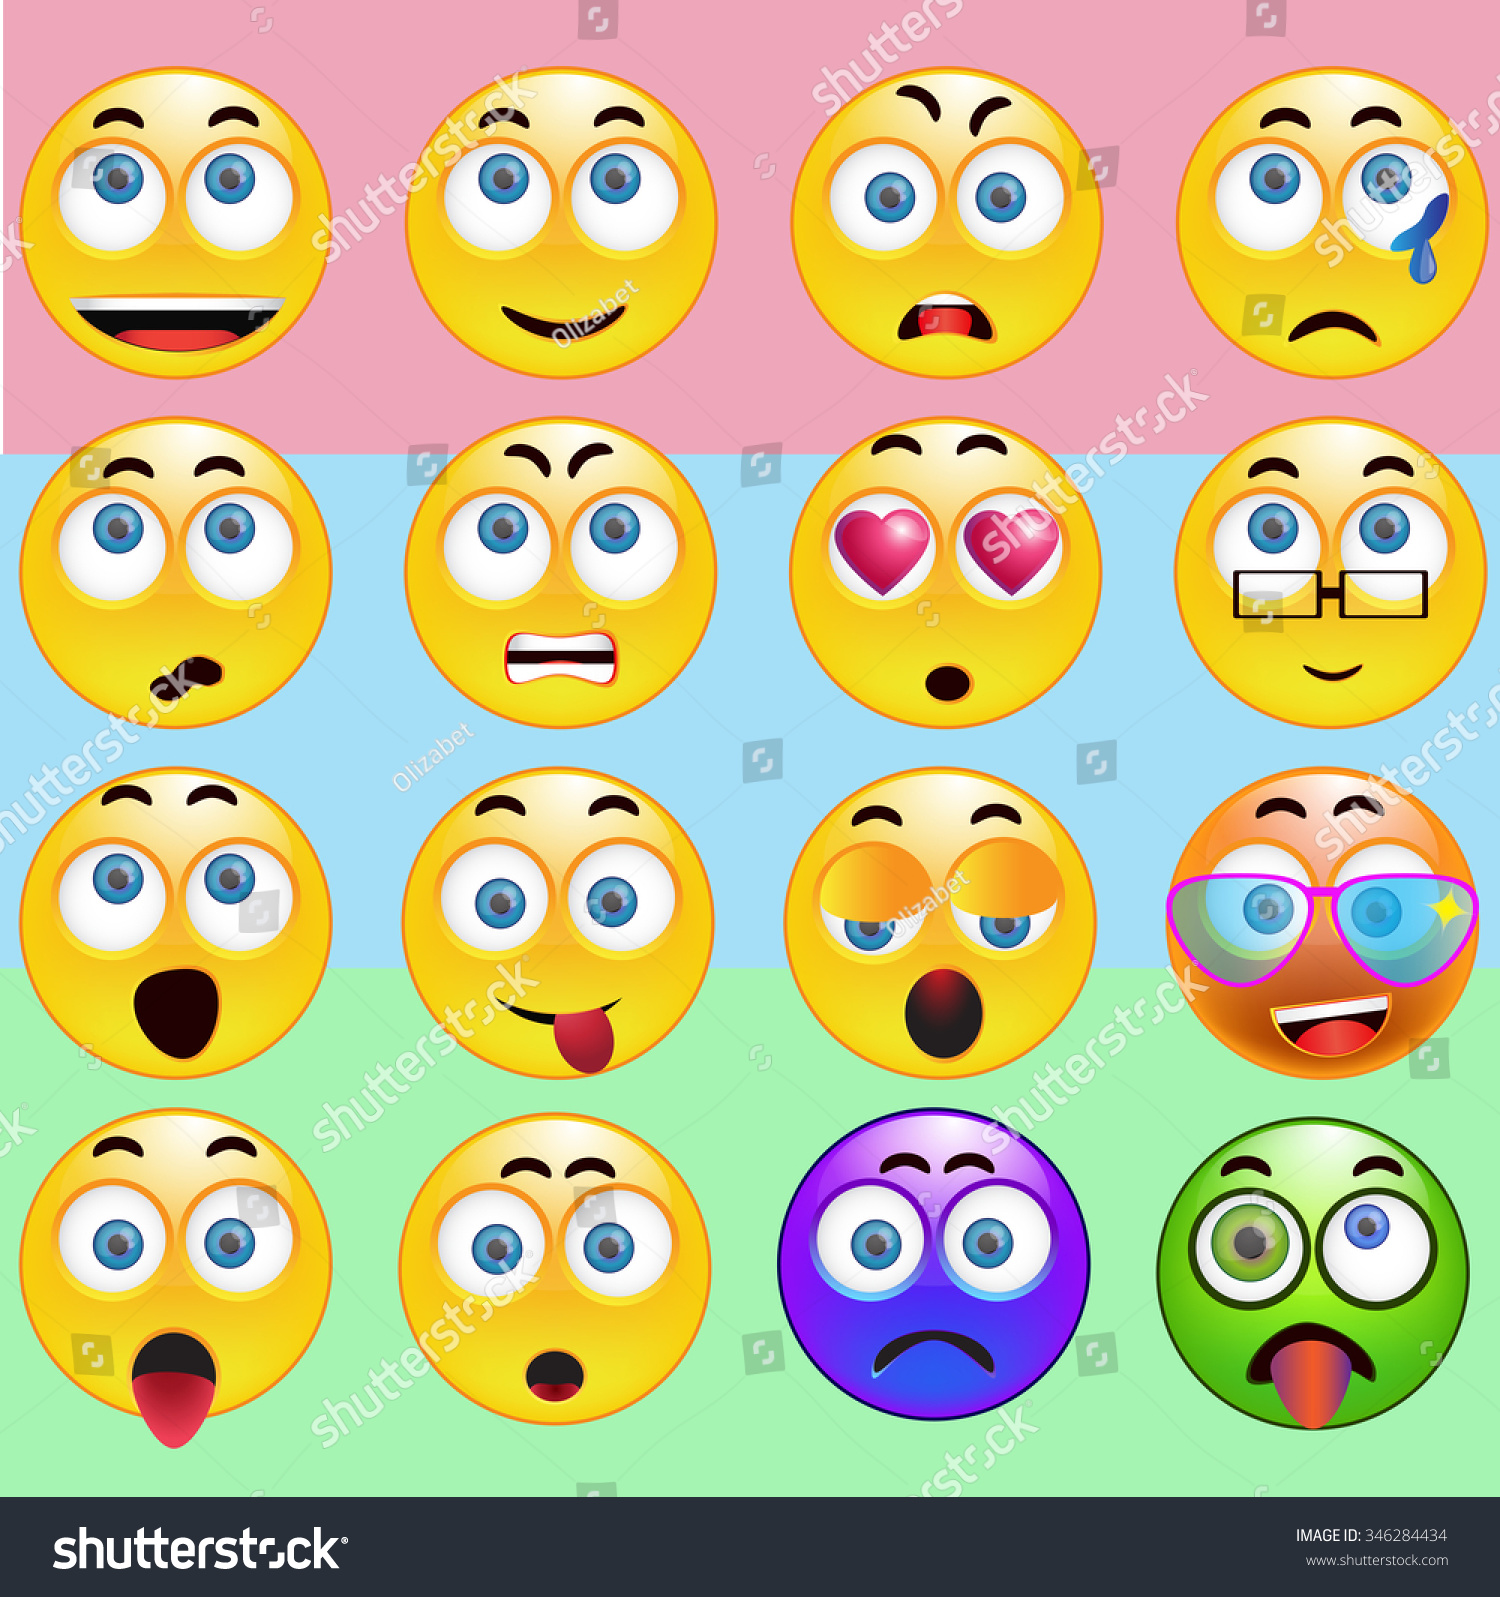 Yellow Classic Emoticon Set Isolated Stock Vector (Royalty Free ...